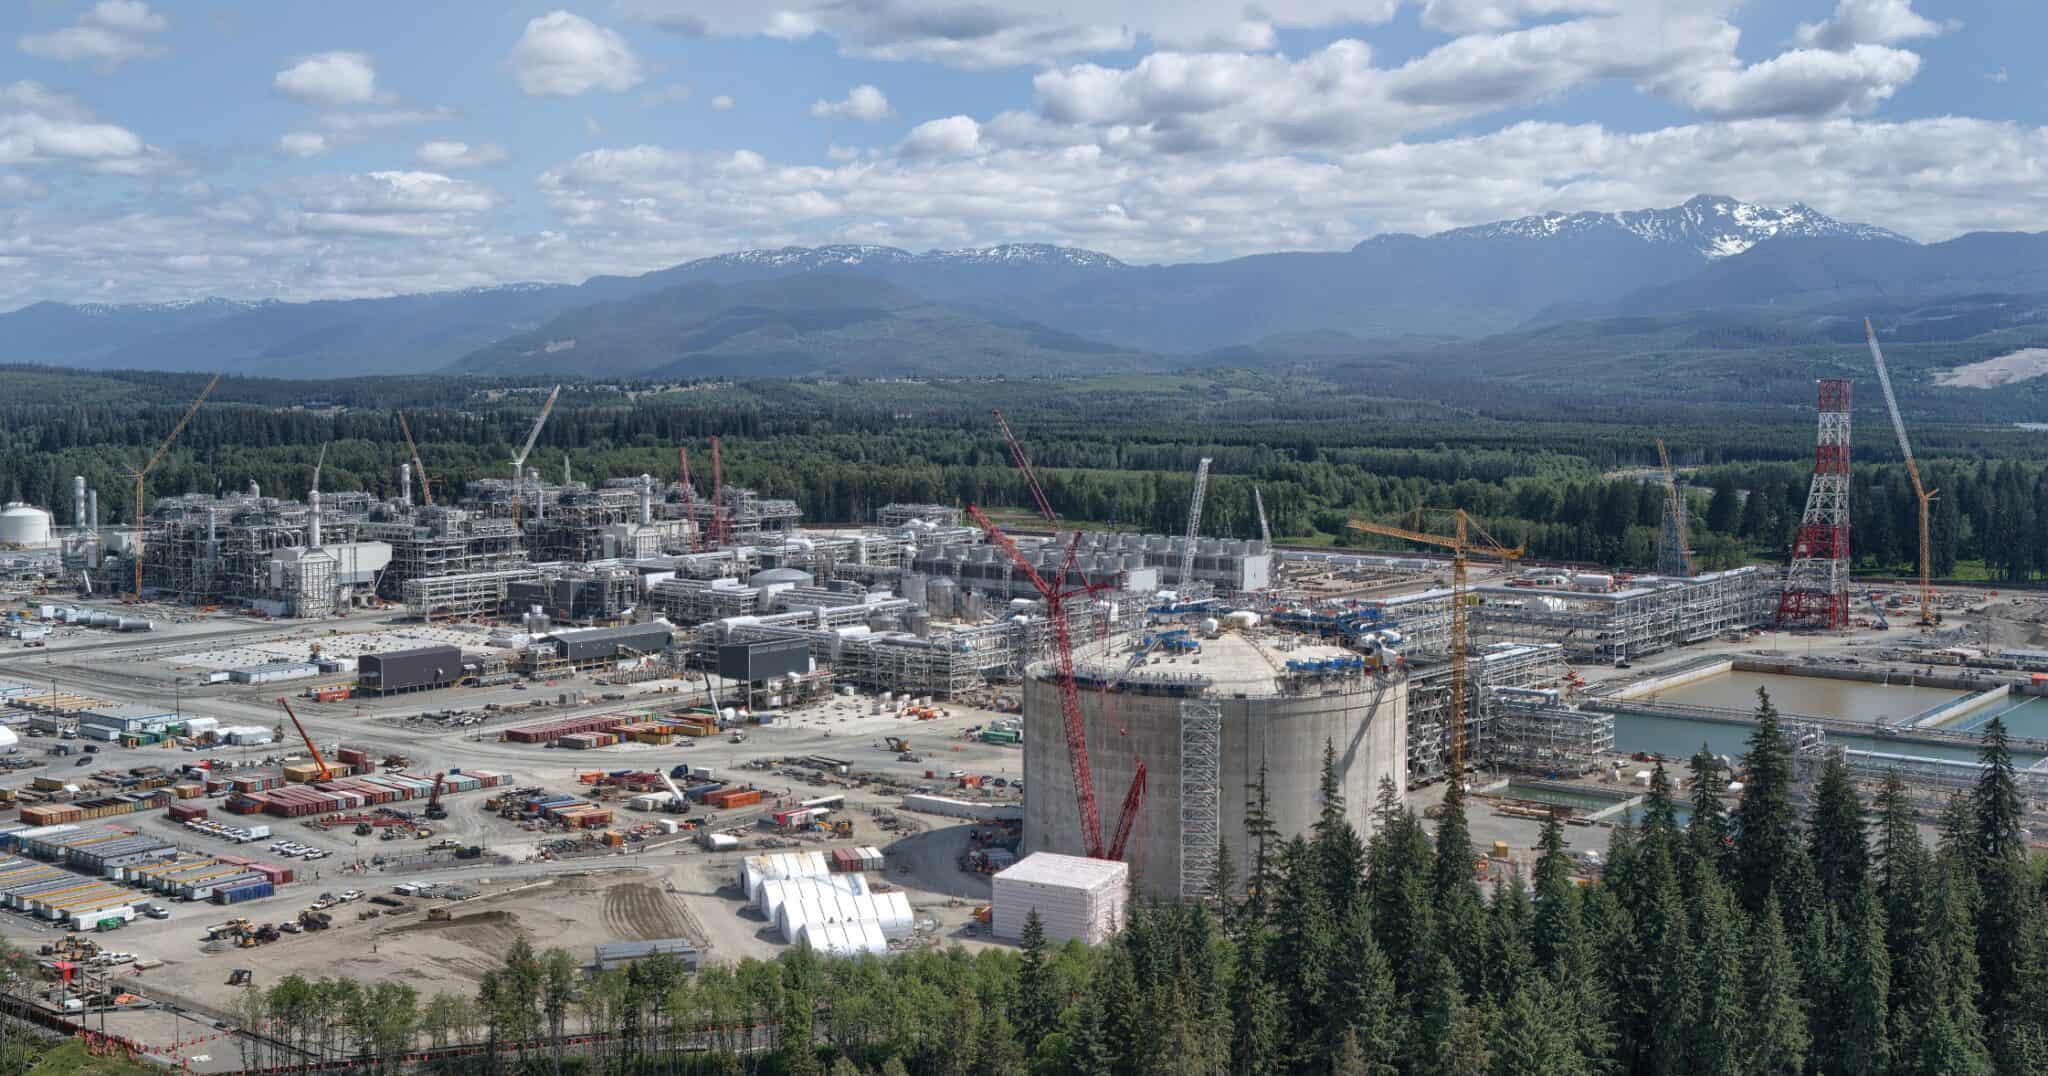 A view of the LNG Canada industrial site with construction equipment and facilities in Kitimat, British Columbia